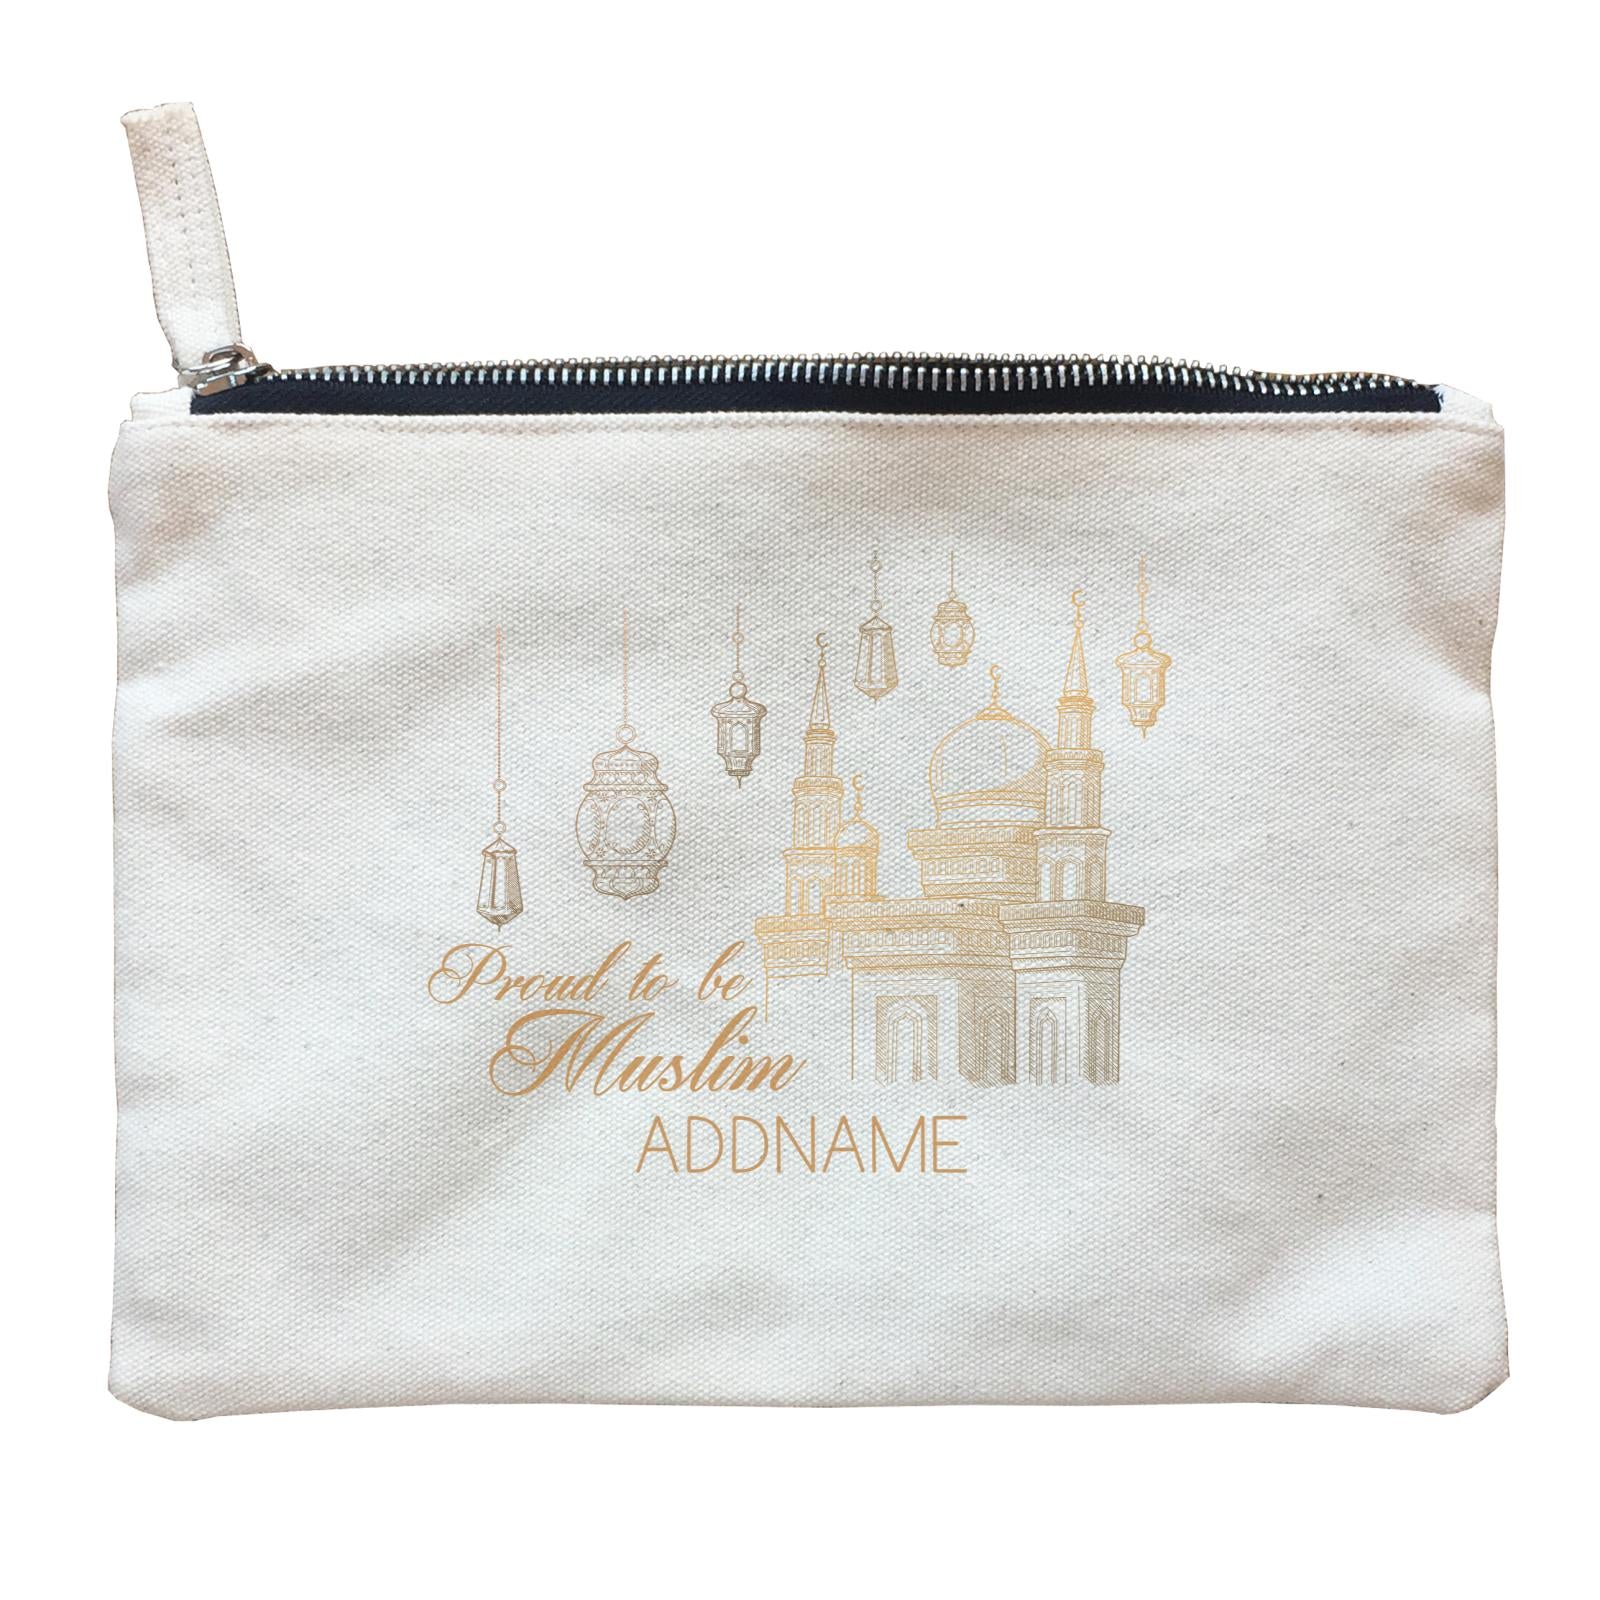 Proud To Be Muslim Gold Mosque Addname Zipper Pouch